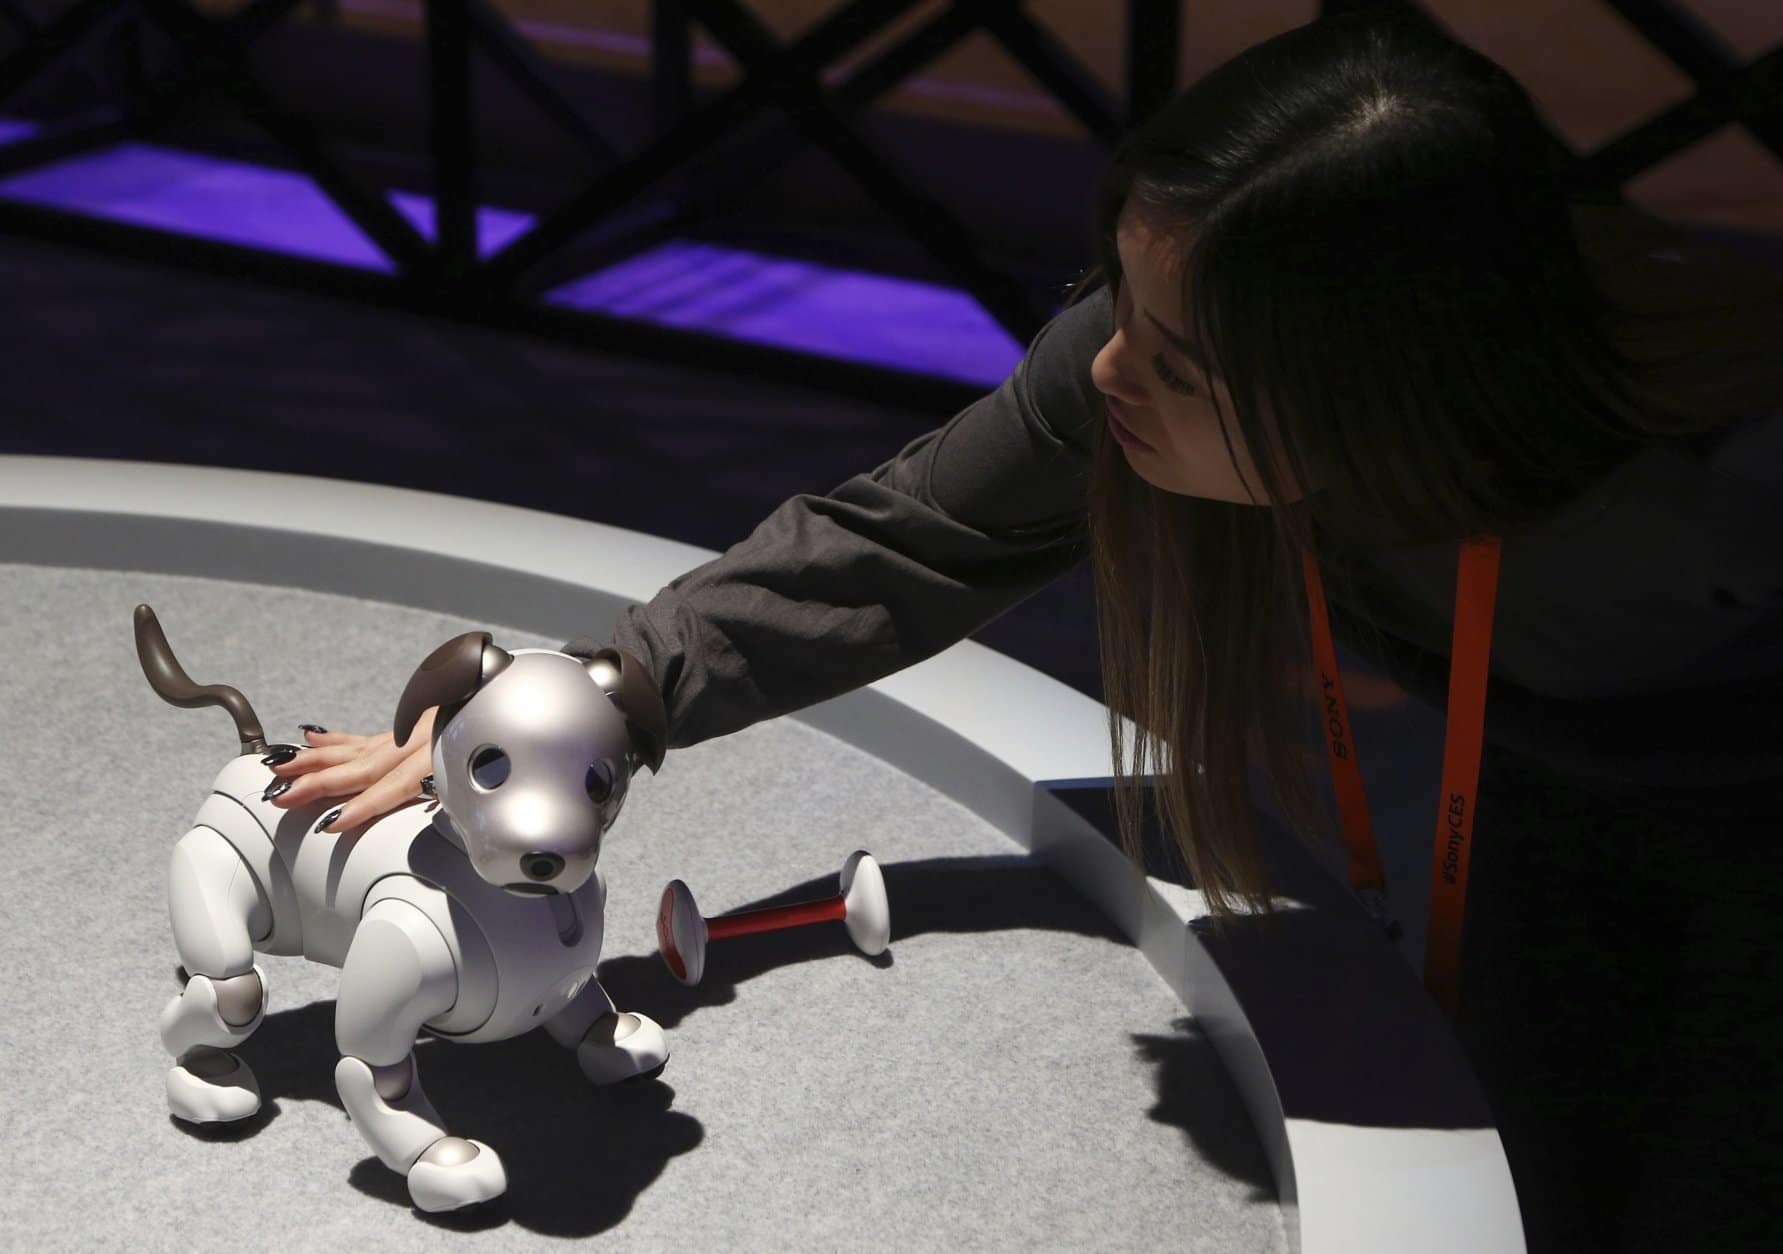 The new edition Sony Aibo robot dog incorporates a series of sensors, cameras, and actuators to activate the pup and keep it interactive, as seen inside the Sony display area at CES International, Monday, Jan. 7, 2019, in Las Vegas. (AP Photo/Ross D. Franklin)